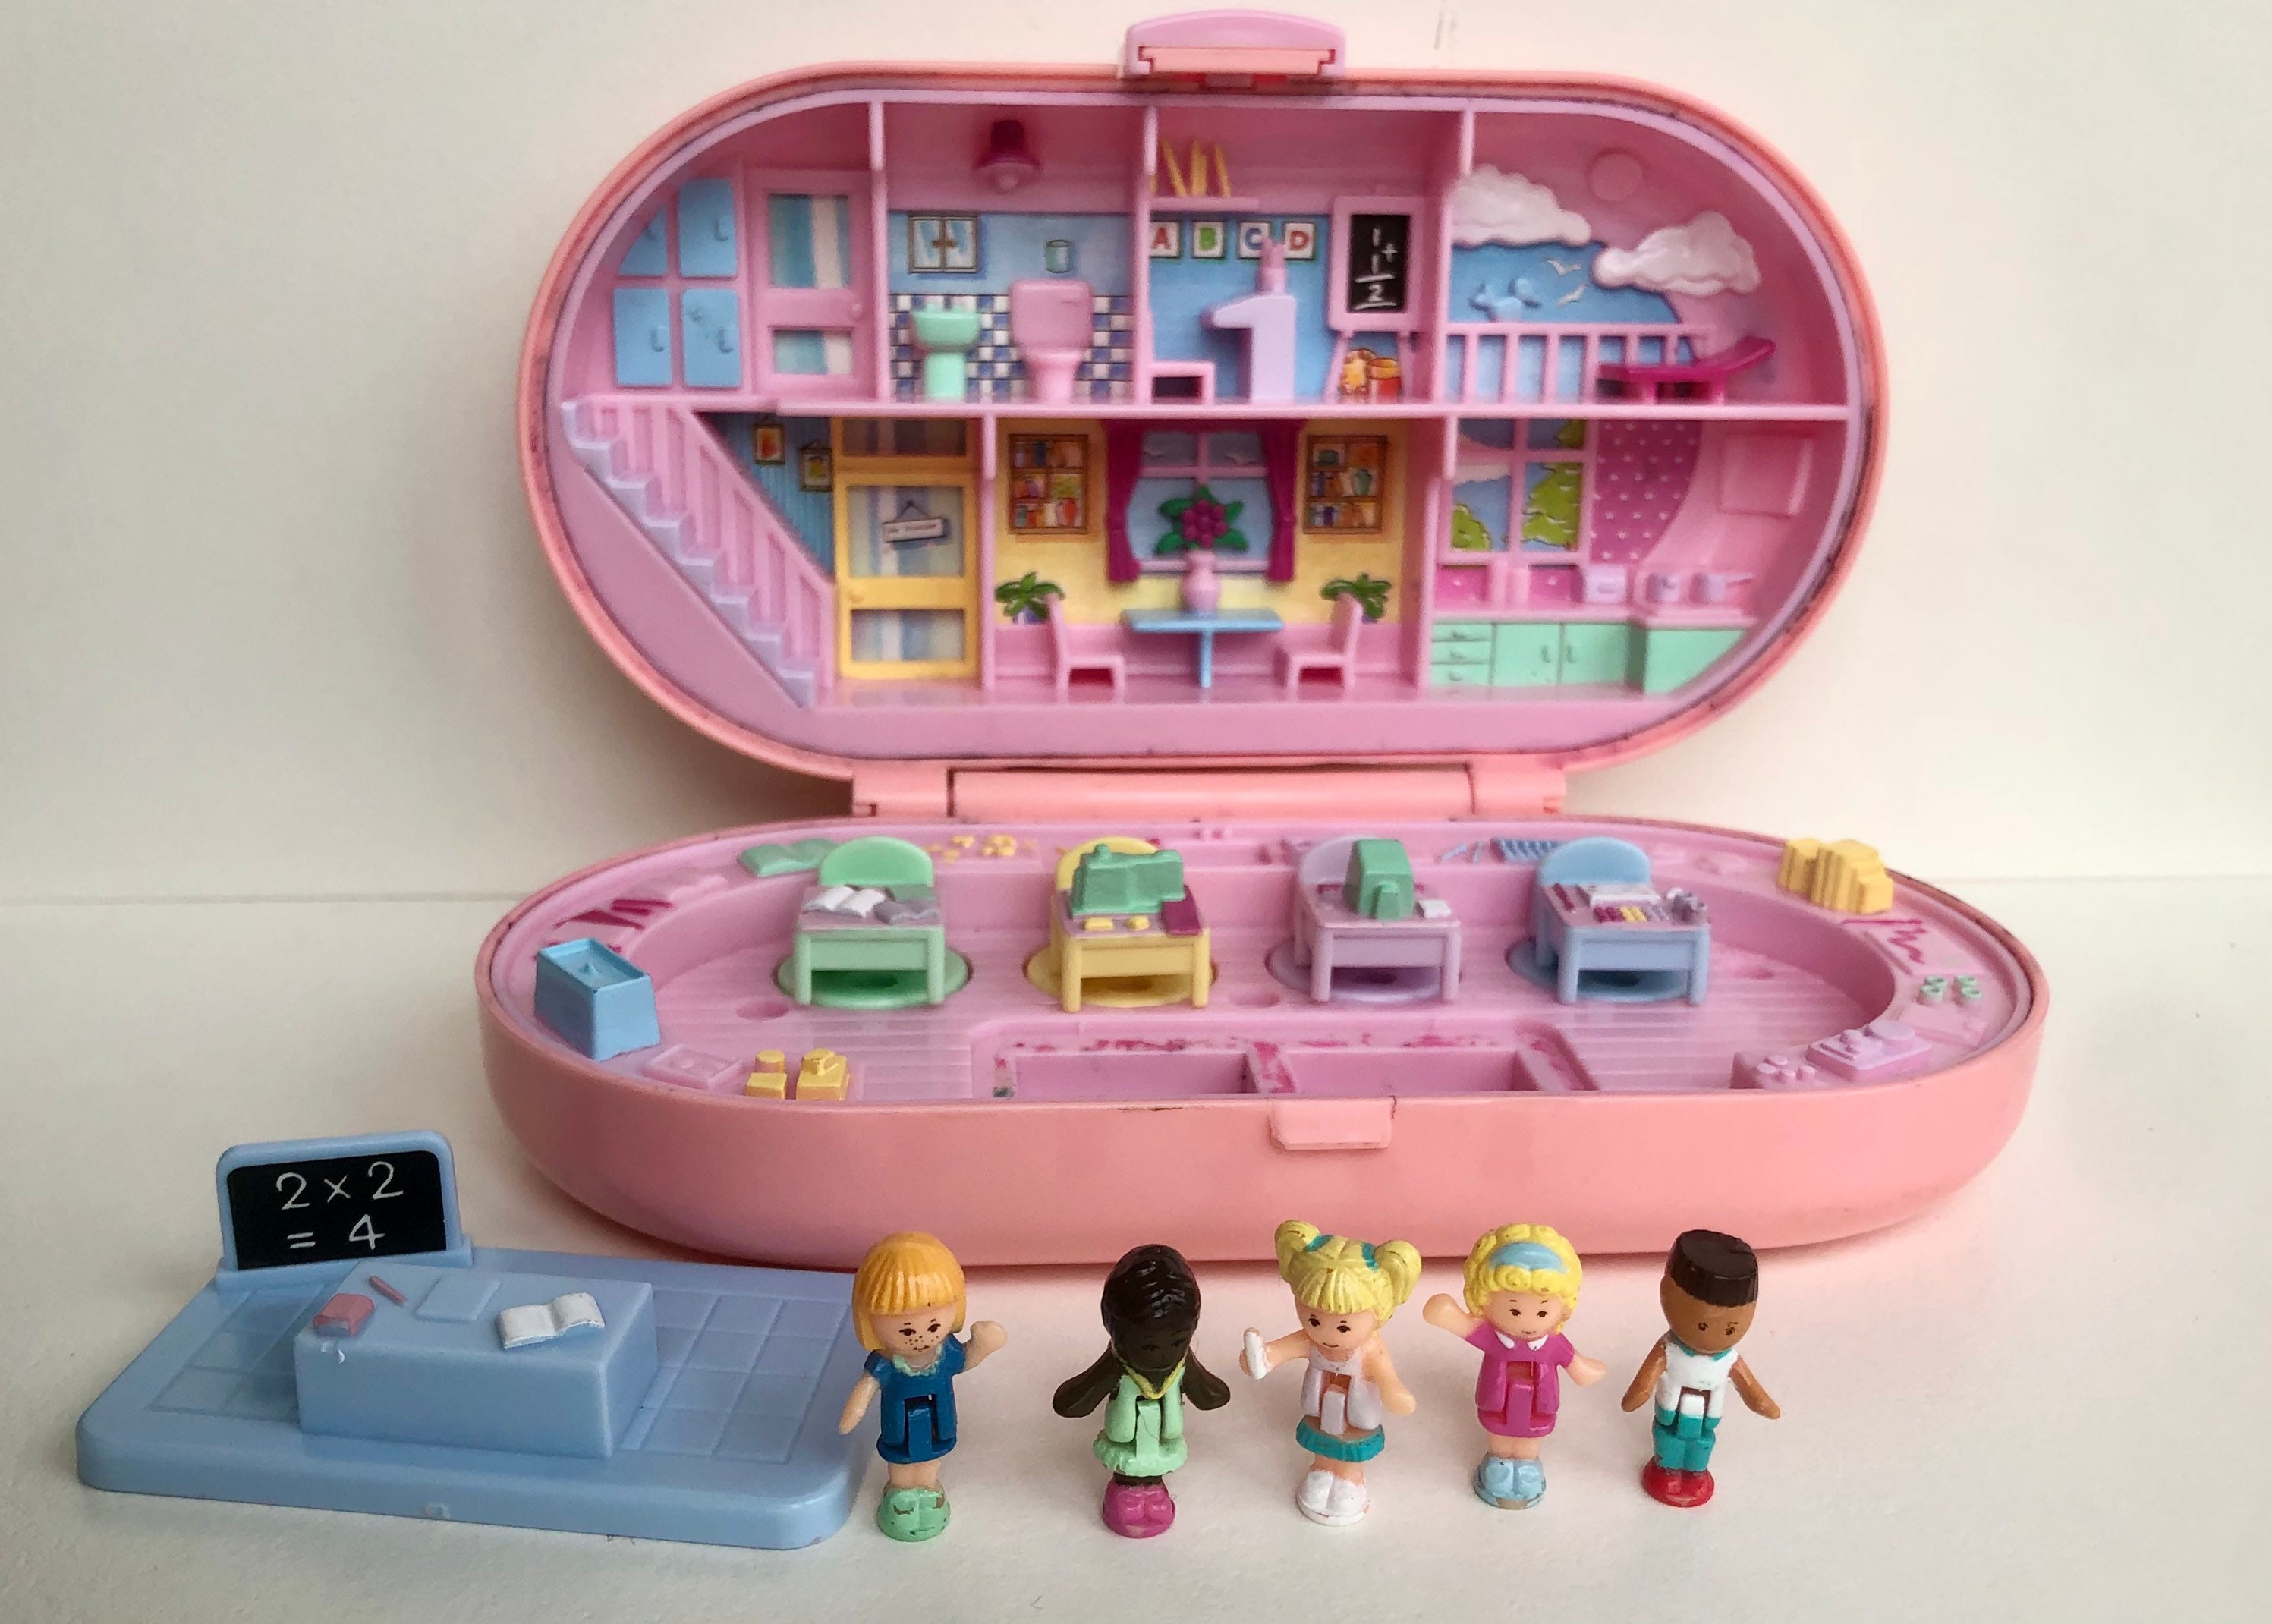 Vintage Polly Pocket Stampin' School Playset. School Stamp Compact. Pink  Variant, No Dolls. 2 Stamps Not Original. 1990s Girls Toys. Cute. 